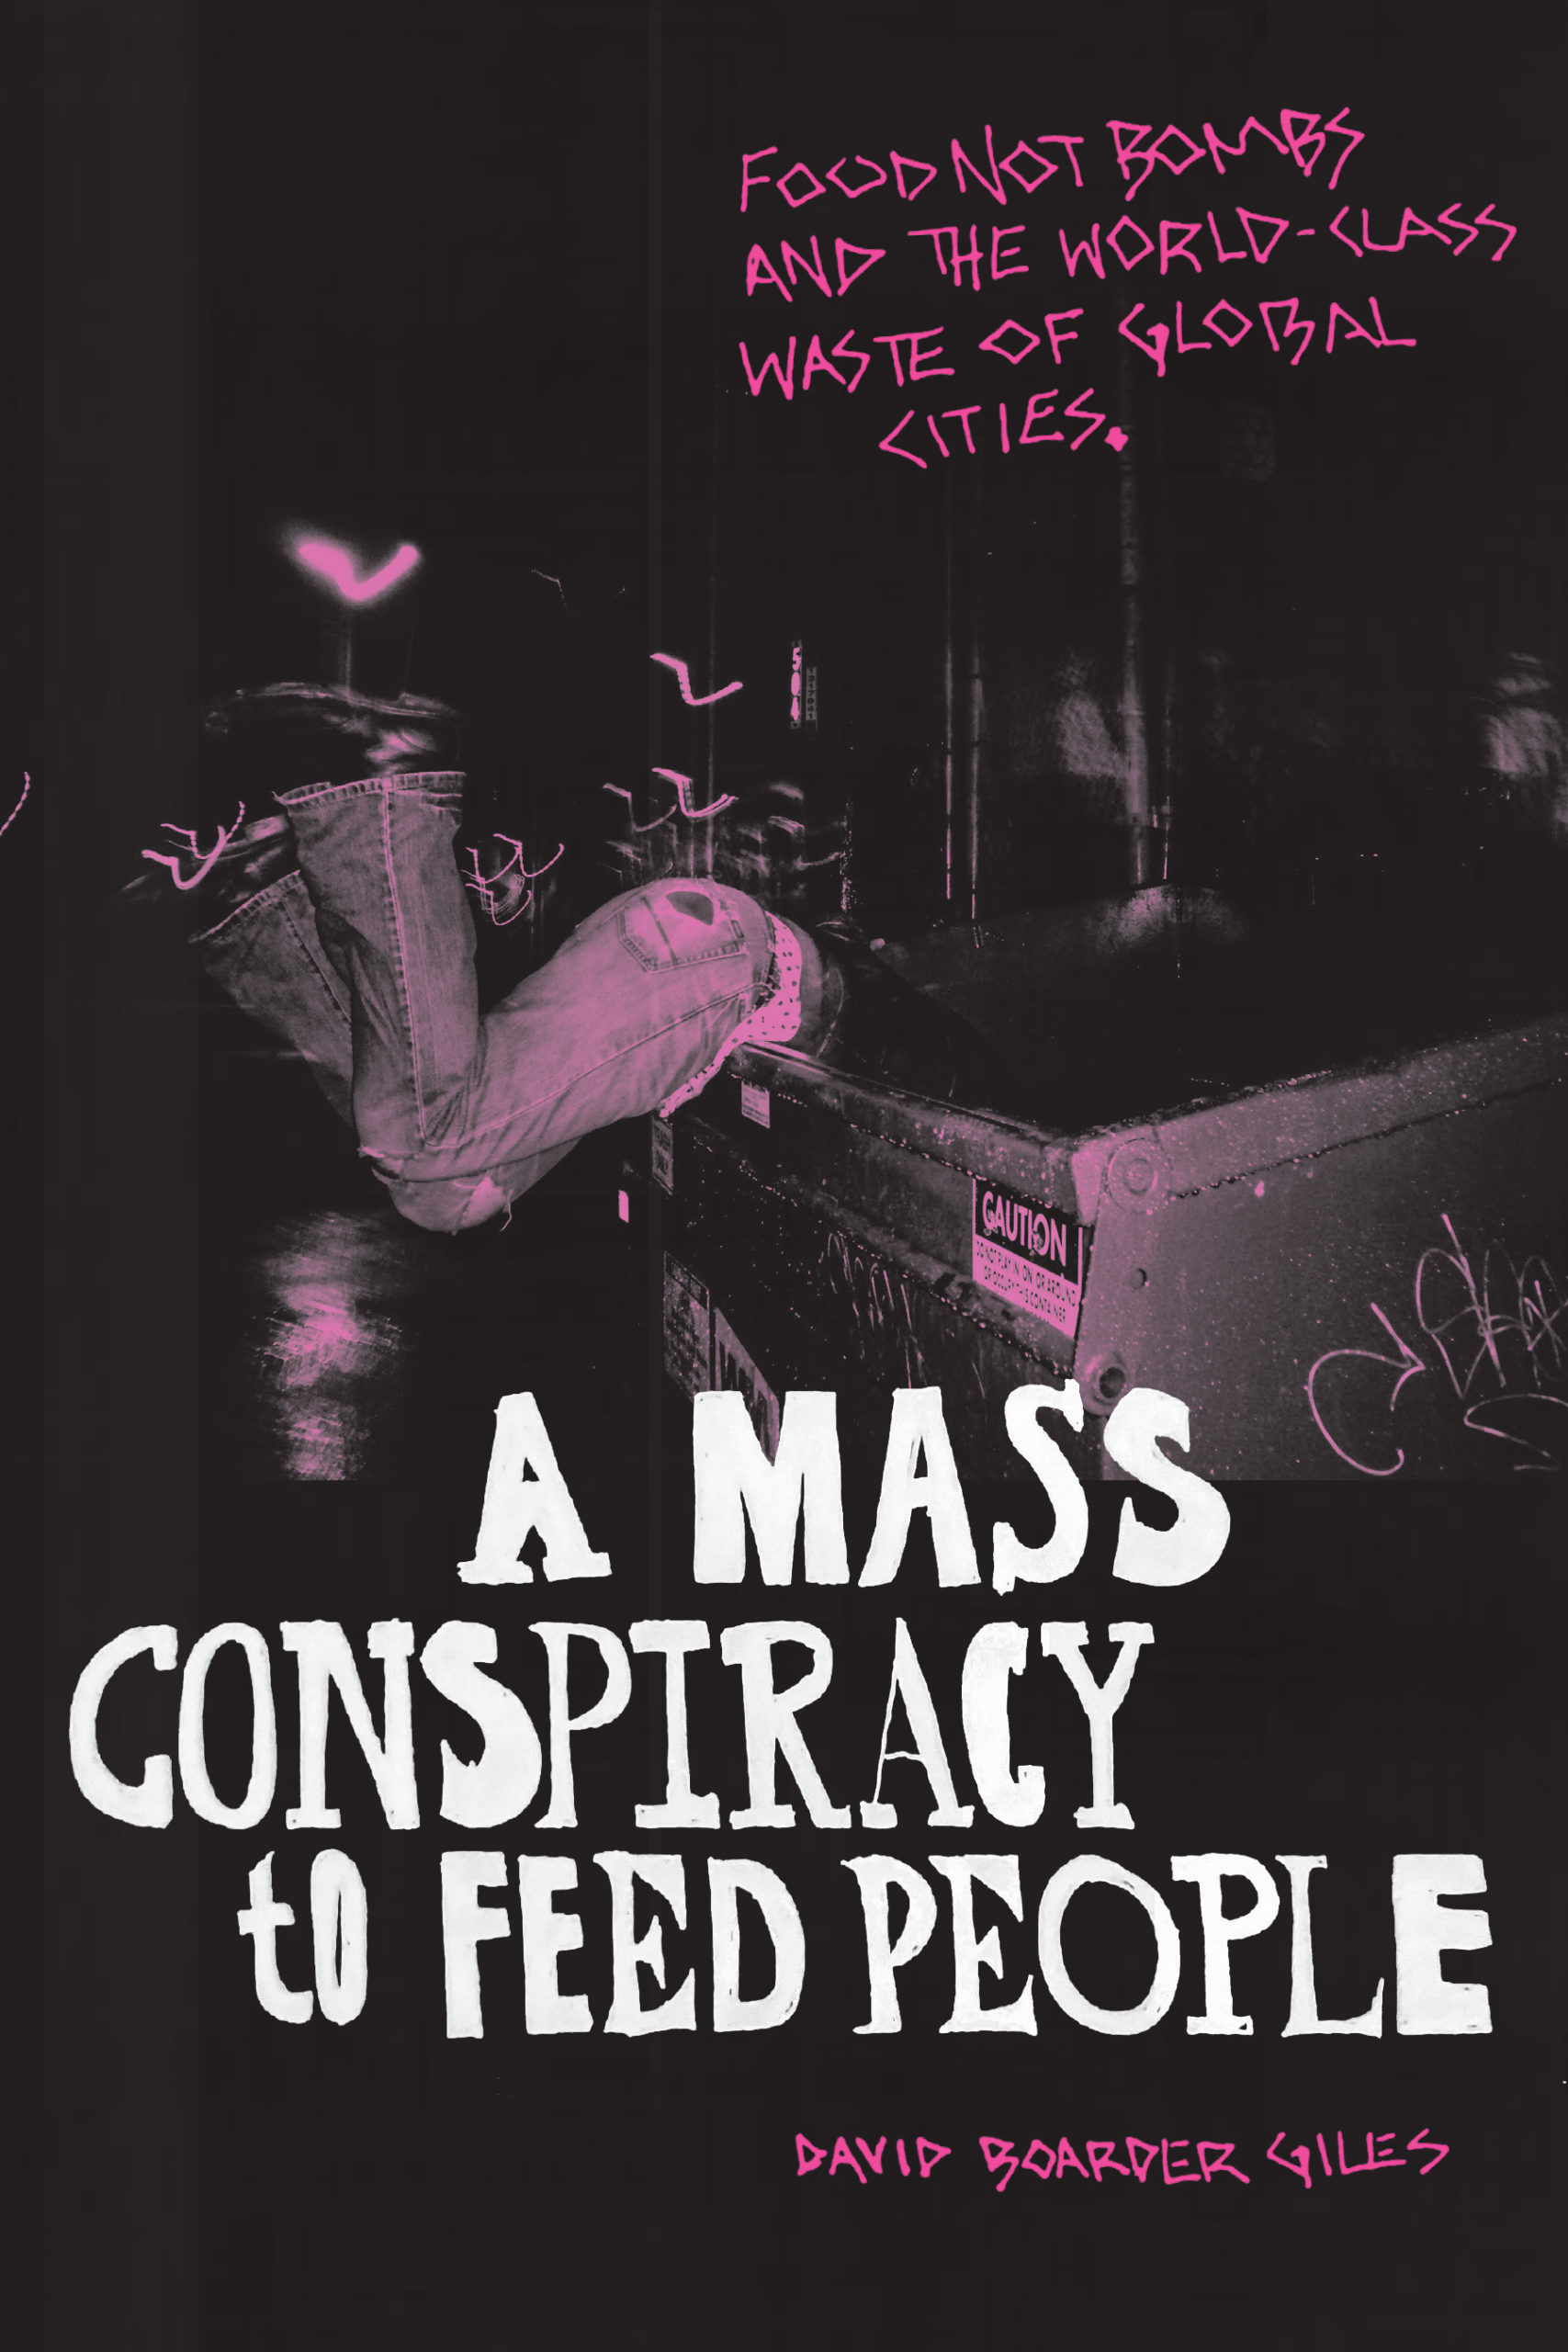 Mass Conspiracy to Feed People: Food Not Bombs and the World-Class Waste of Global Cities 